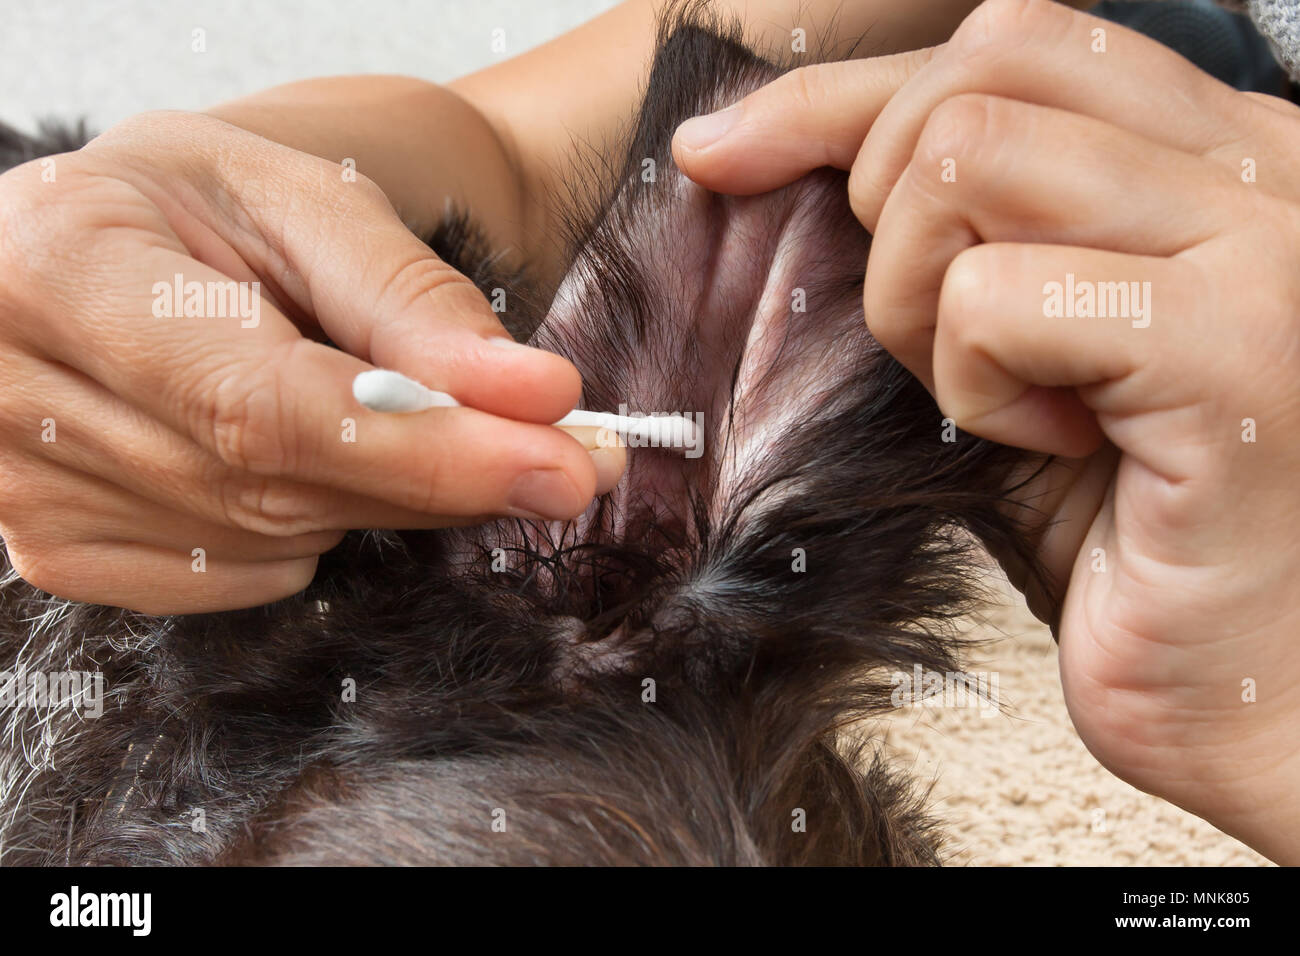 hands cleaning the ear of dog from earwax with cotton swab Stock Photo